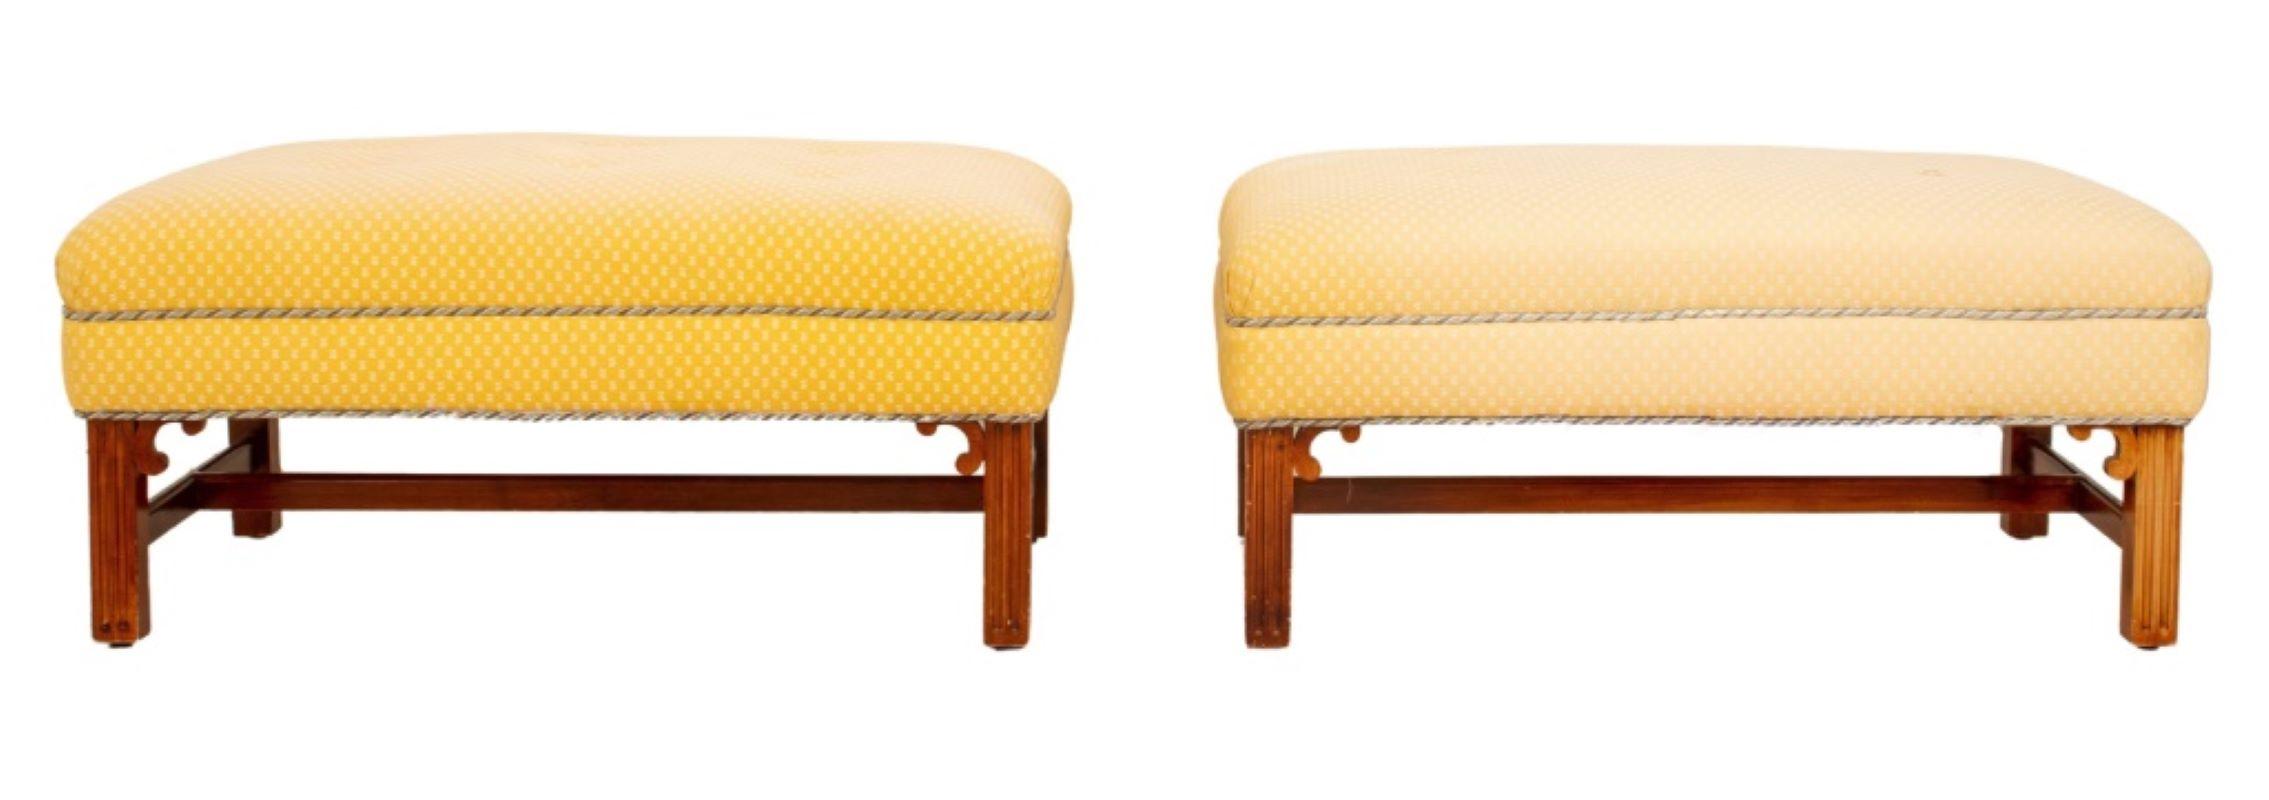 Pair (2) of Chinese Chippendale style benches, each rectangular with buttoned upholstered yellow jacquard tops (faded), on reeded square legs with scroll brackets, the legs joined by H stretchers. 16